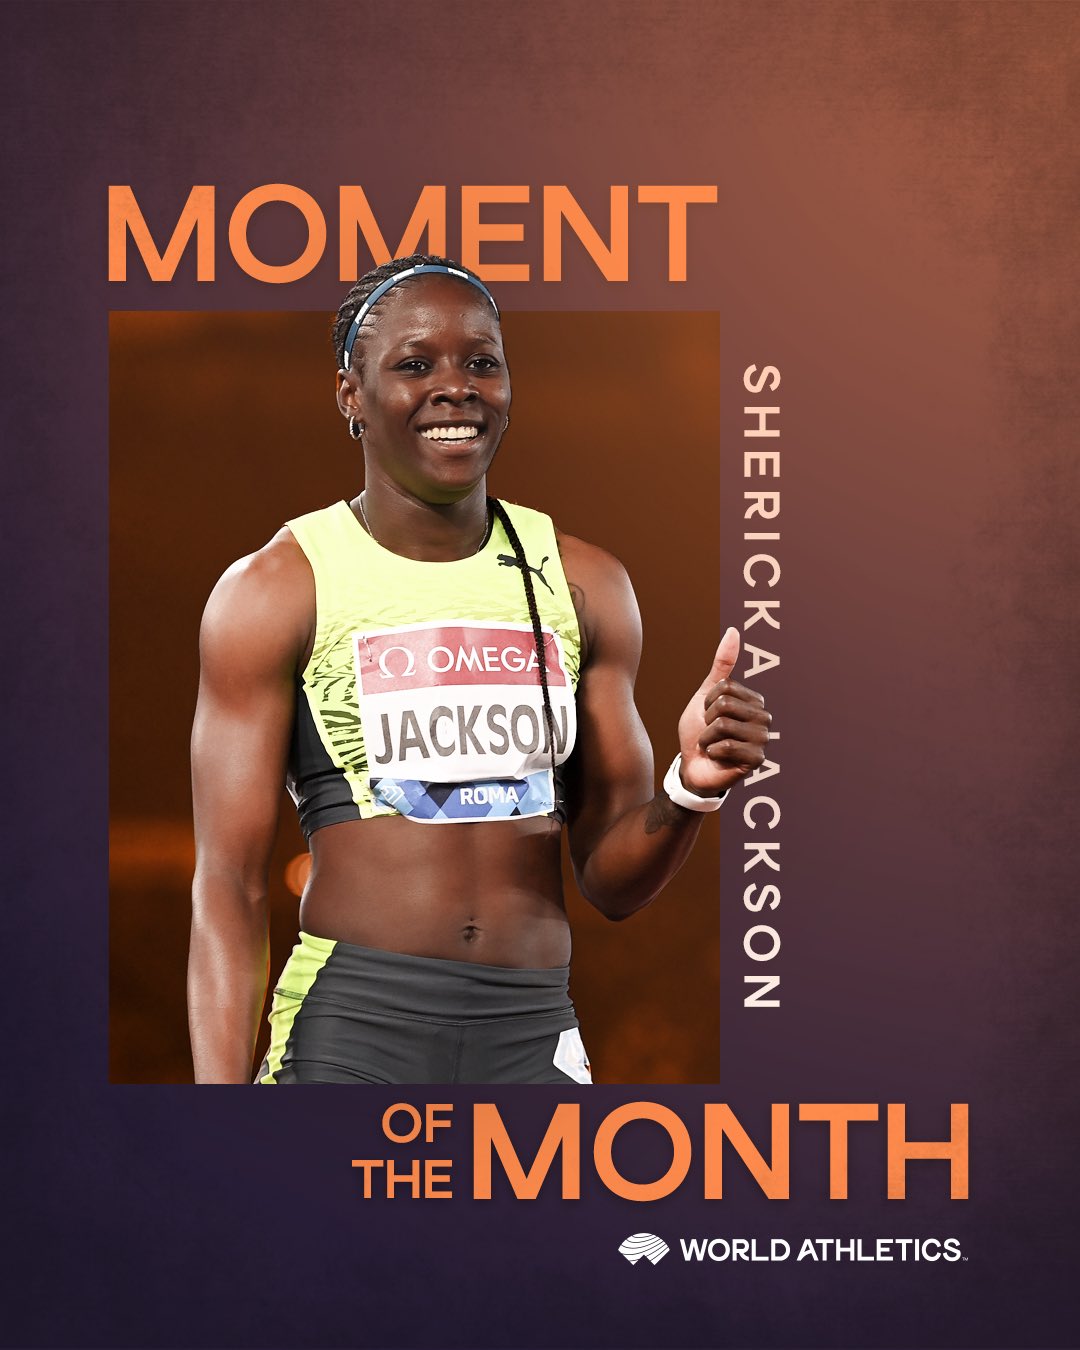 Jamaican Shericka Jackson is the winner of the Moment of the month Award presented by World Athletics.